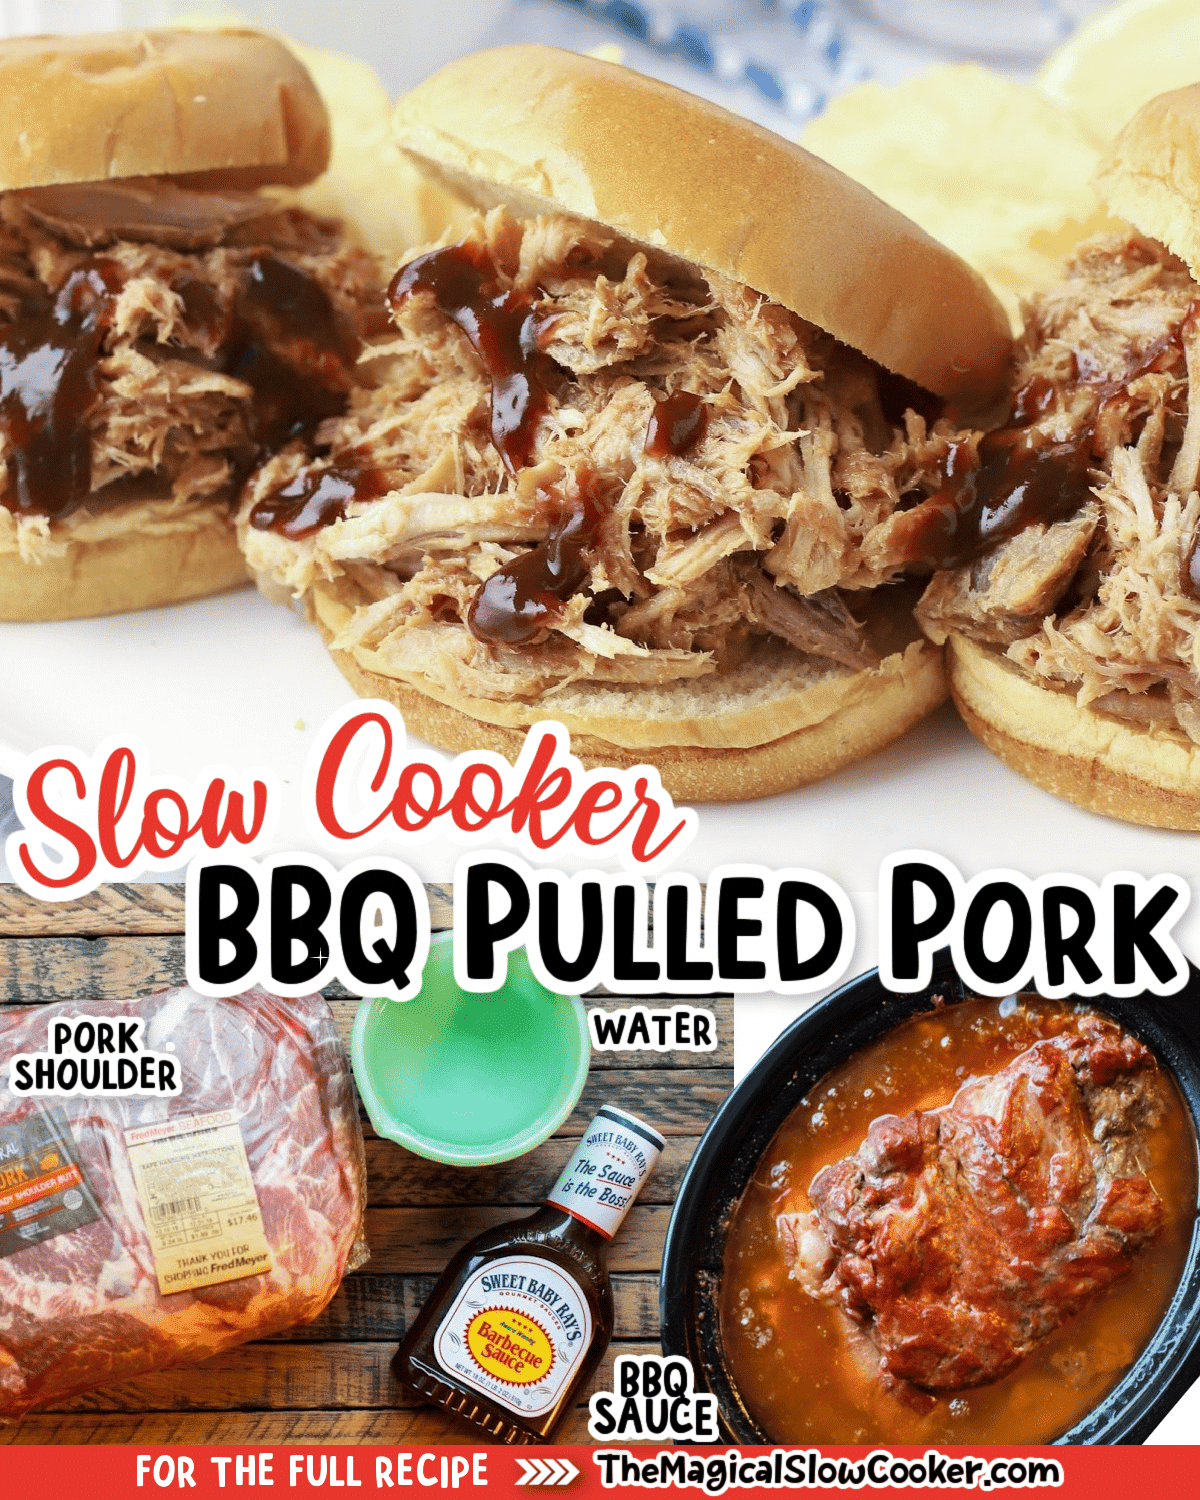 Collage of bbq pork images with text of what ingredients are.